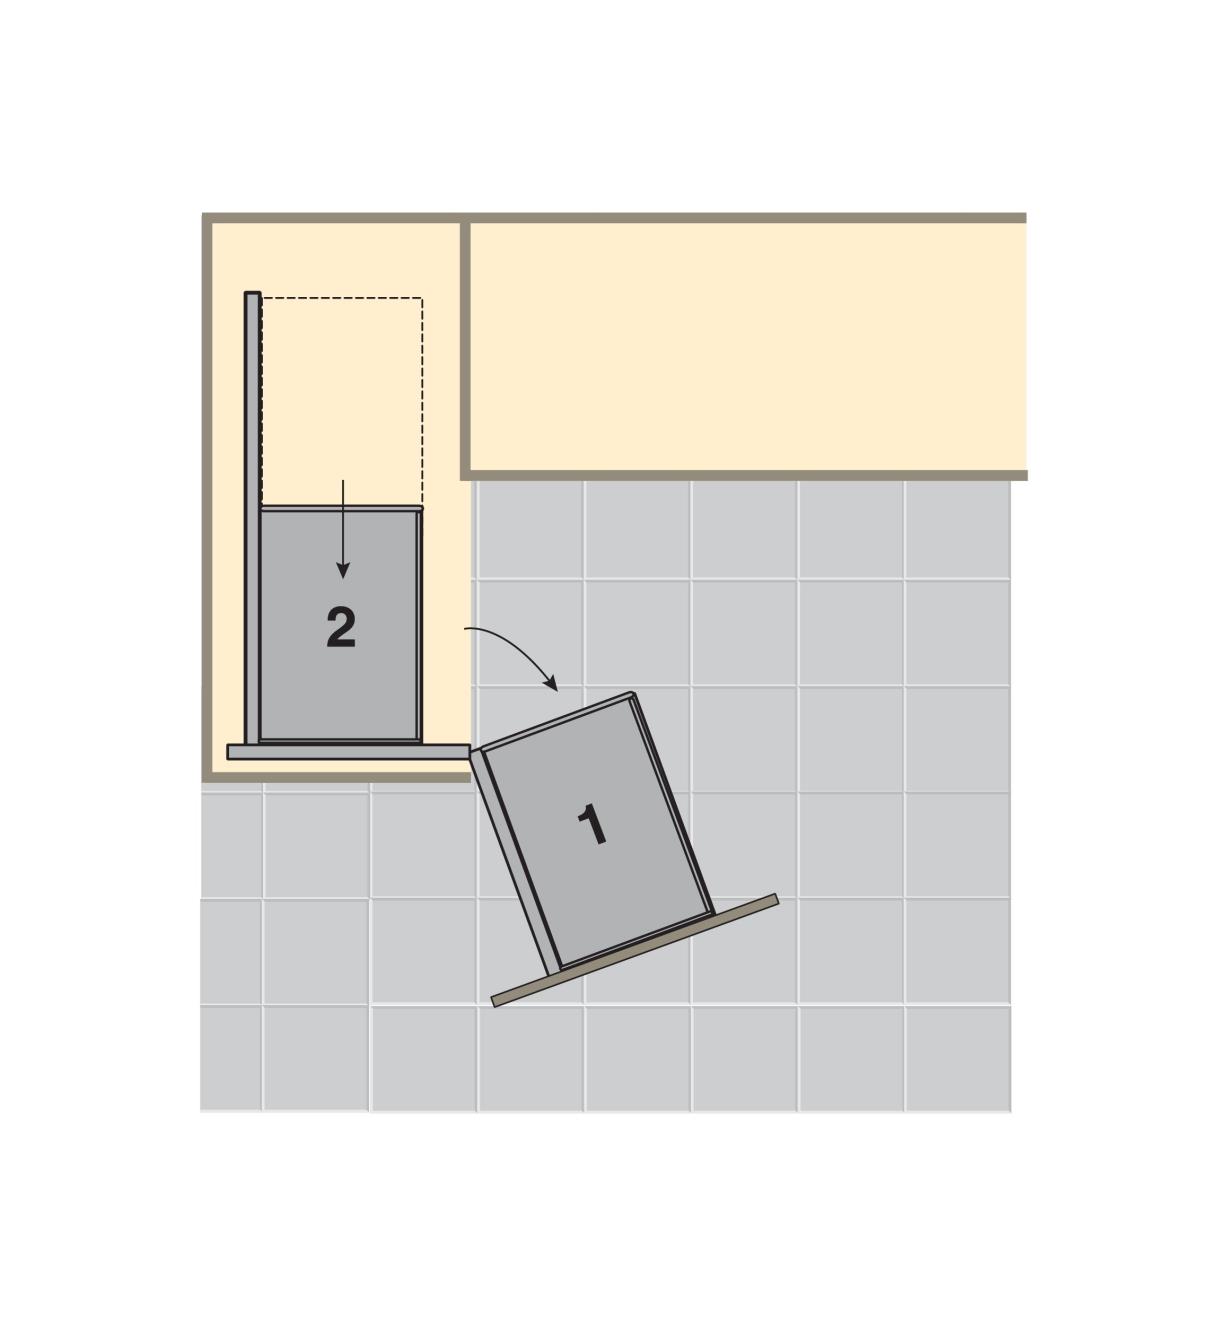 Top-view diagram shows installed blind-corner unit shelves moving as the cabinet door is opened